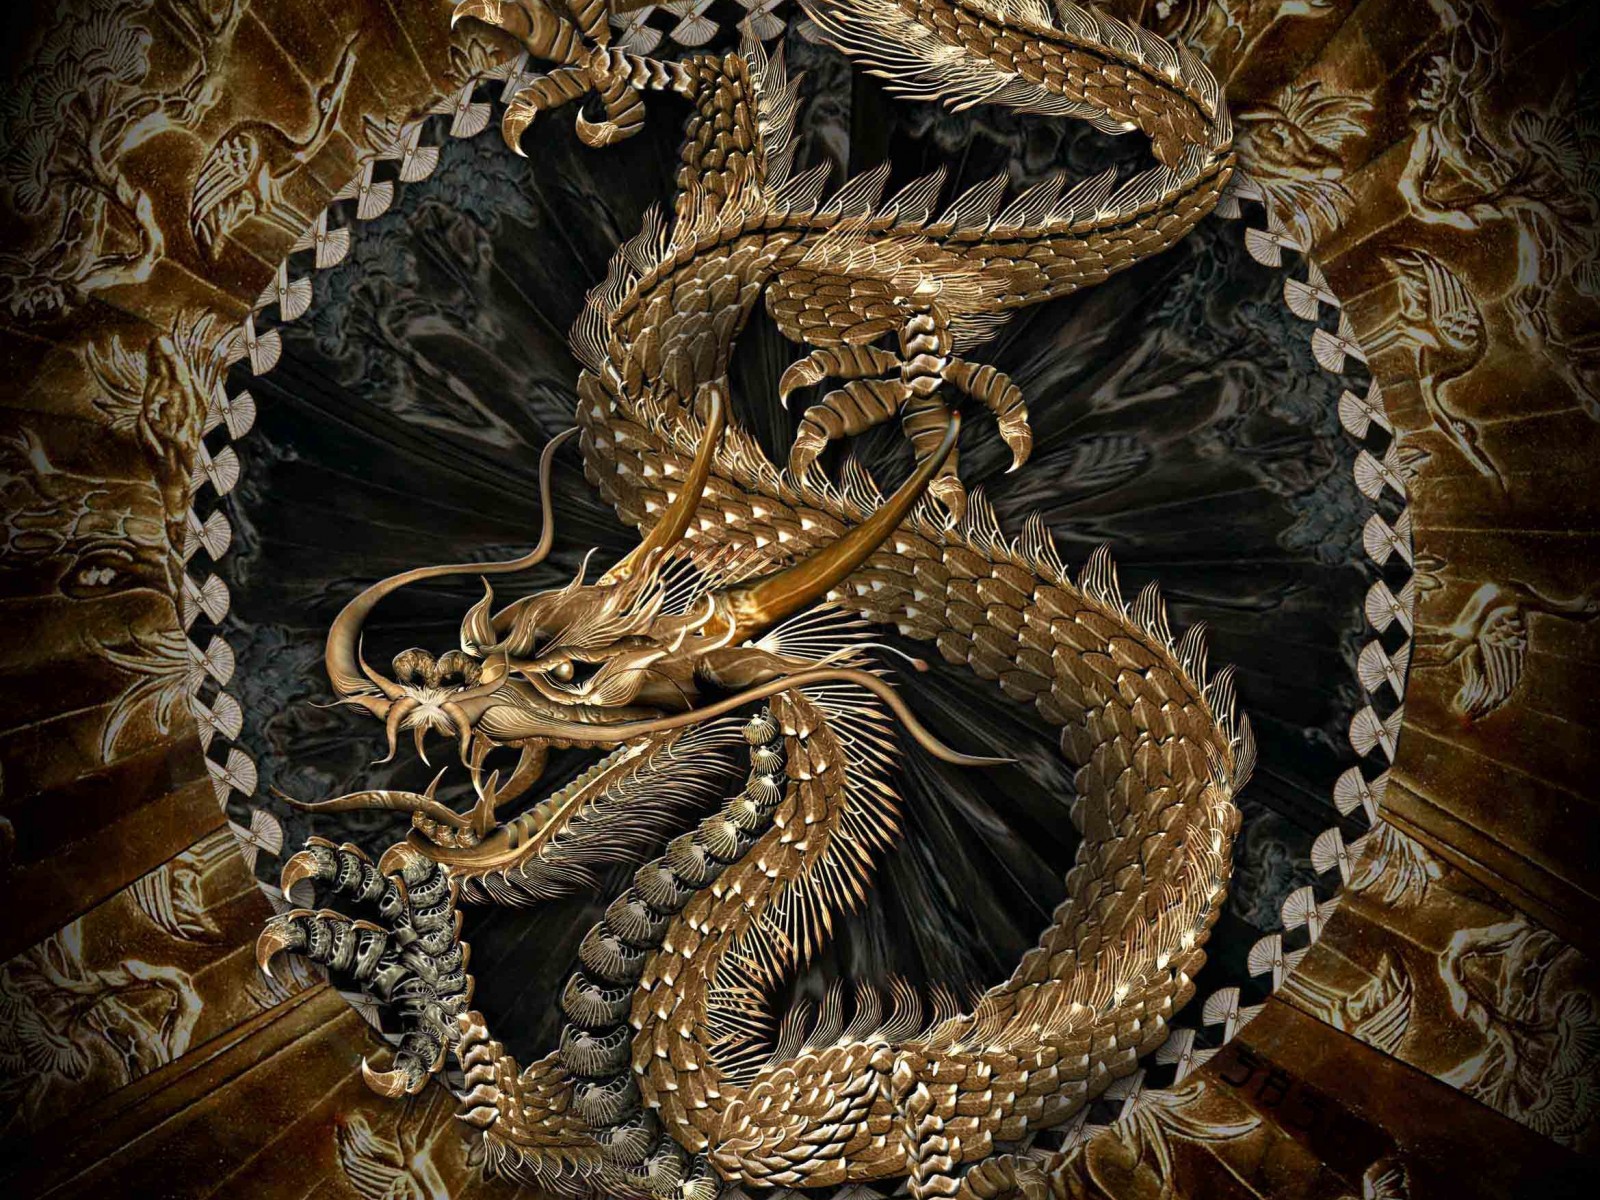 free dragon wallpaper downloads,dragon,serpent,mythology,fictional character,mythical creature